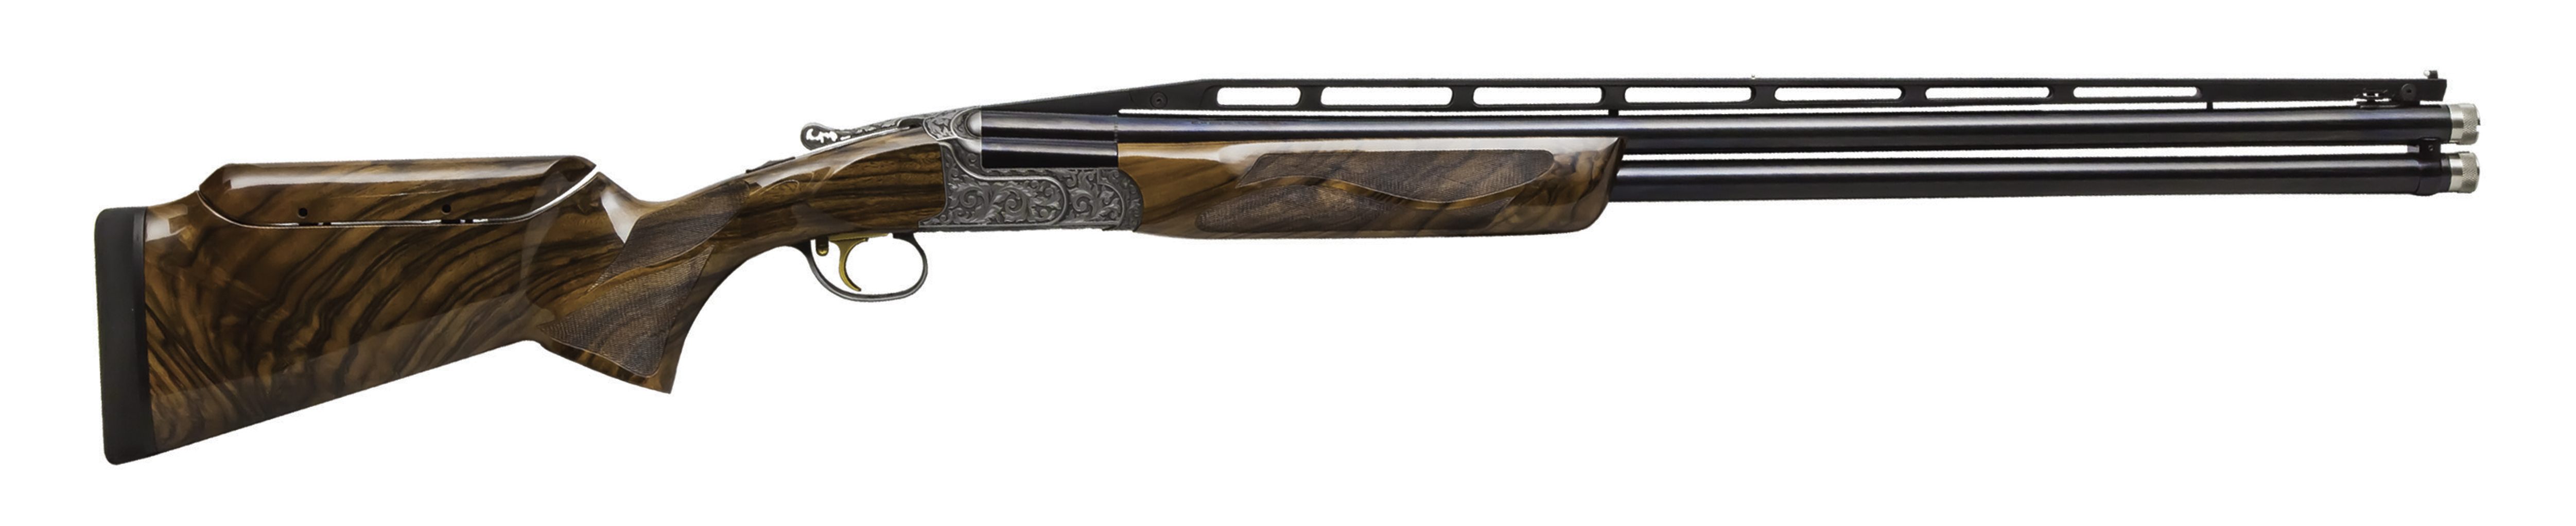 The Kolar Max Skeet over/under is the epitome of classy sporting shotguns today.